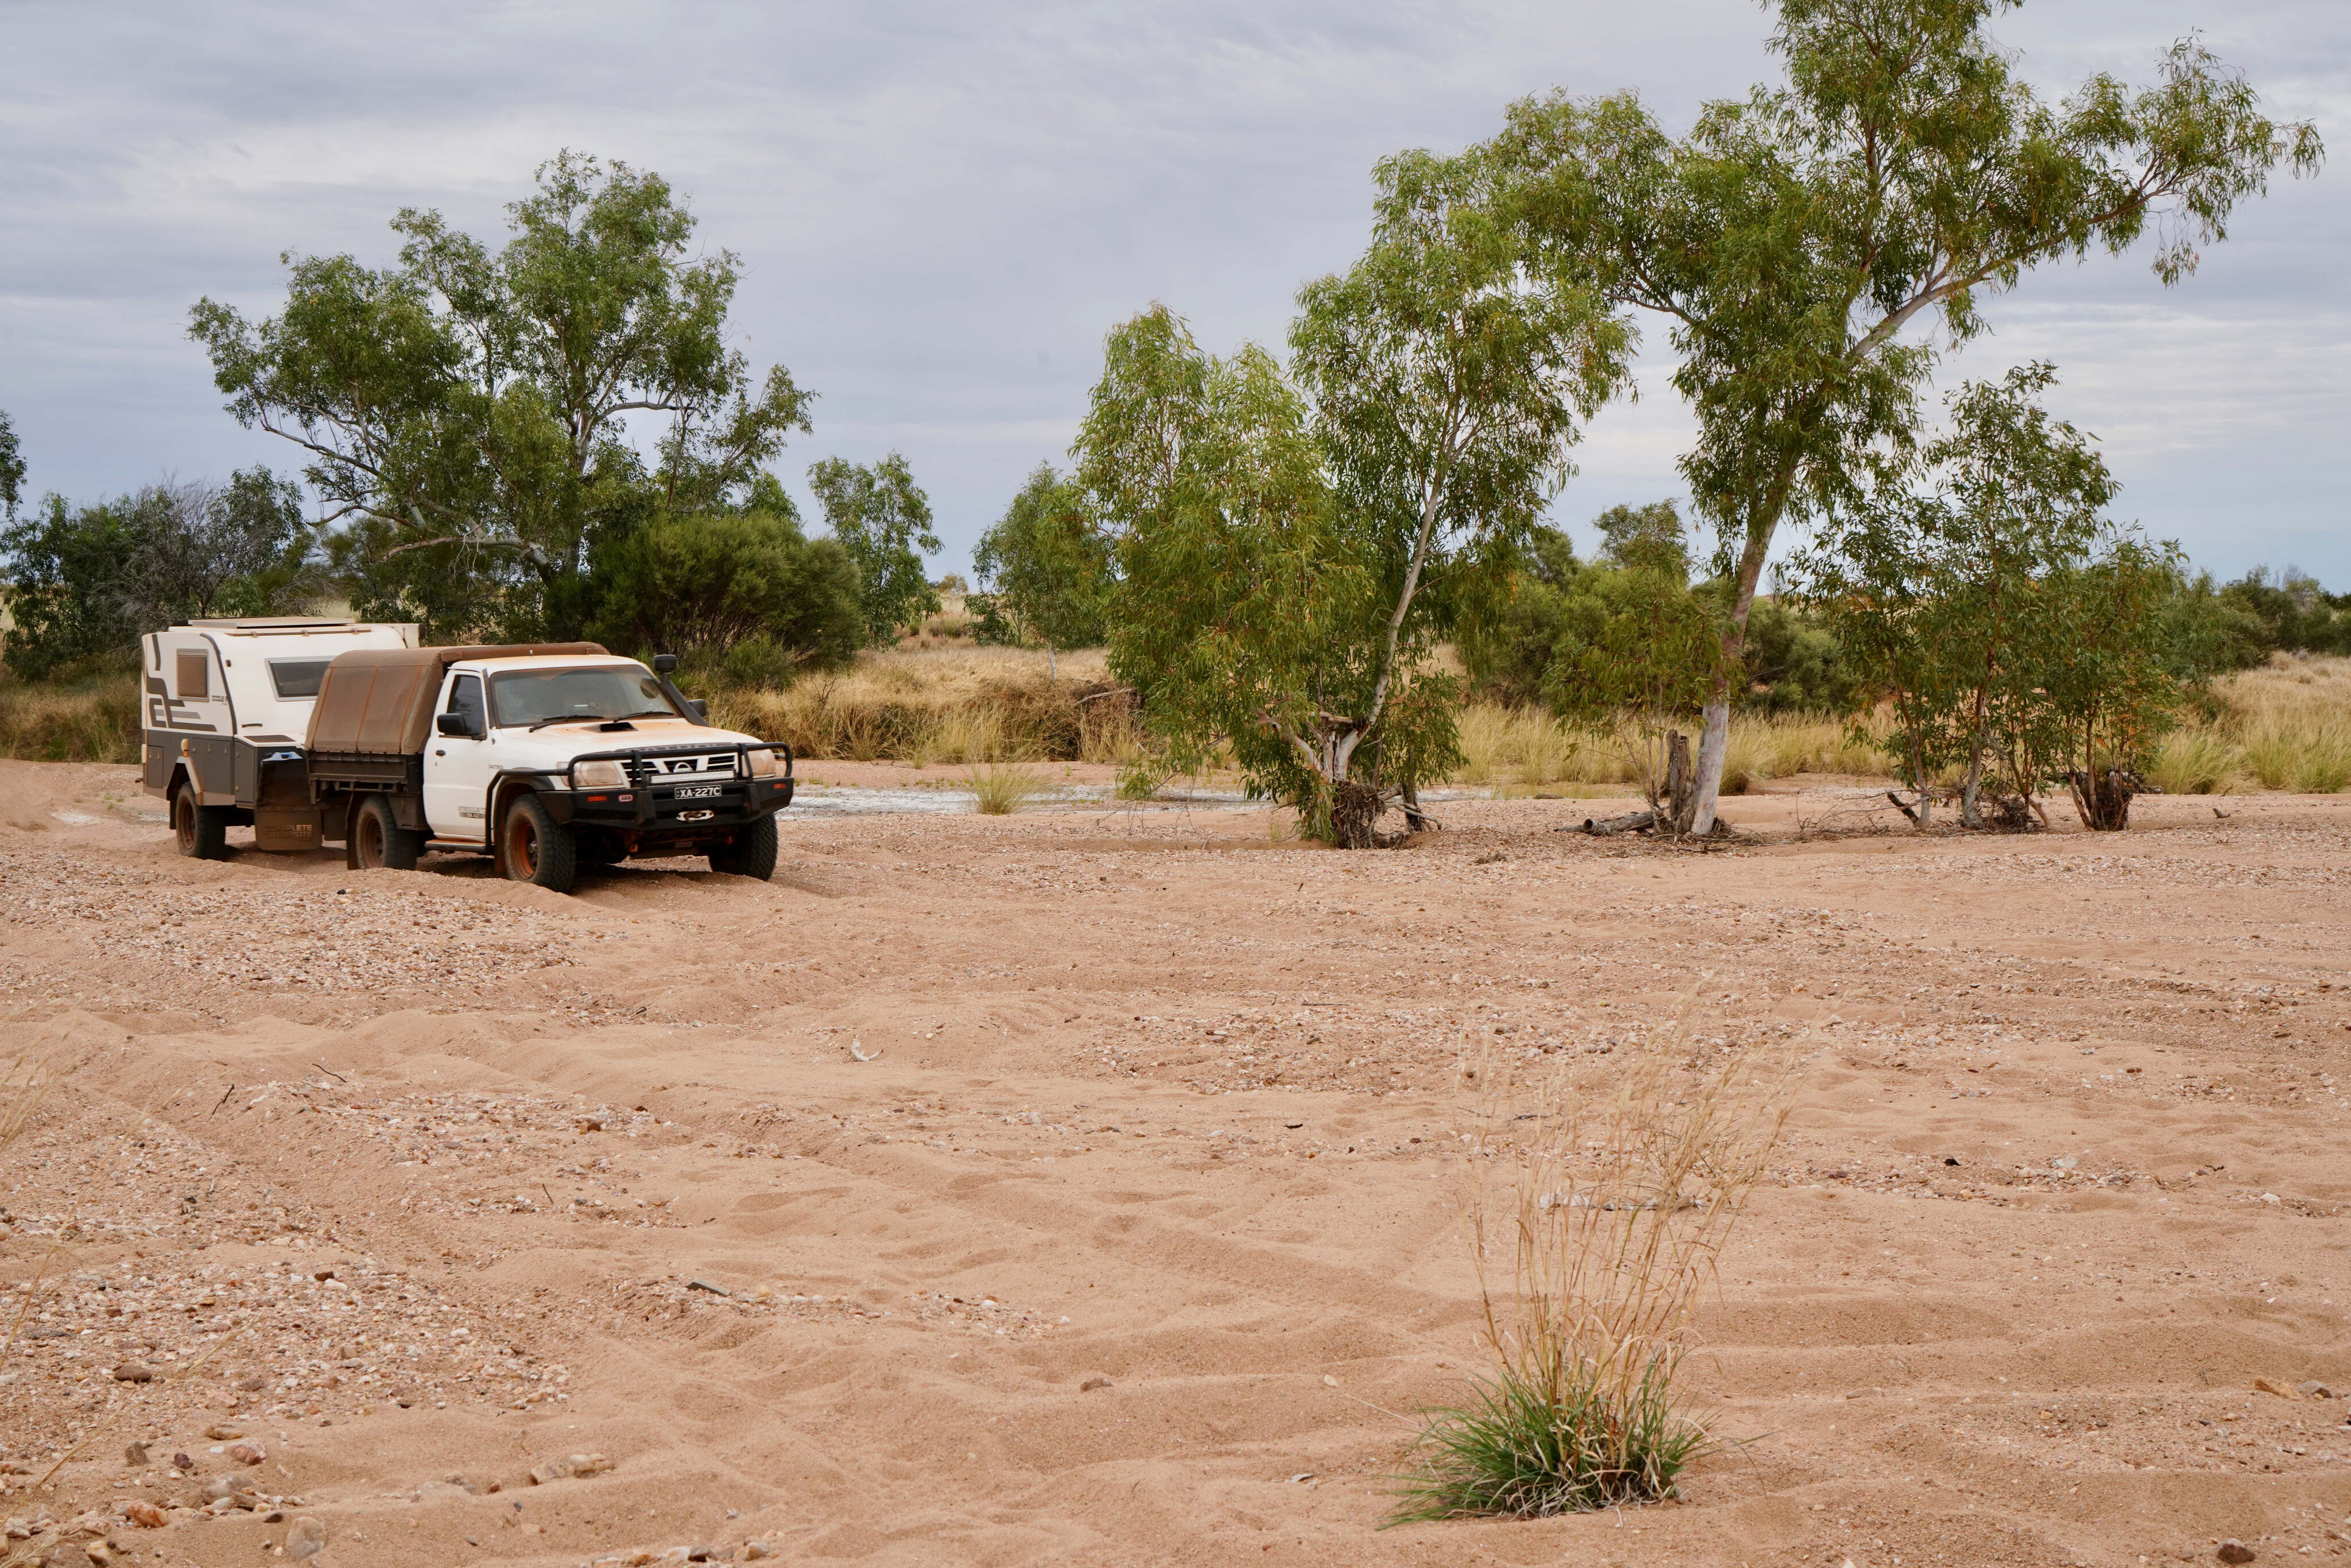 1229324f/rr005 crossing the normally dry but sandy rudall river is generally no issue explore rudall river 4x4 australia jpg